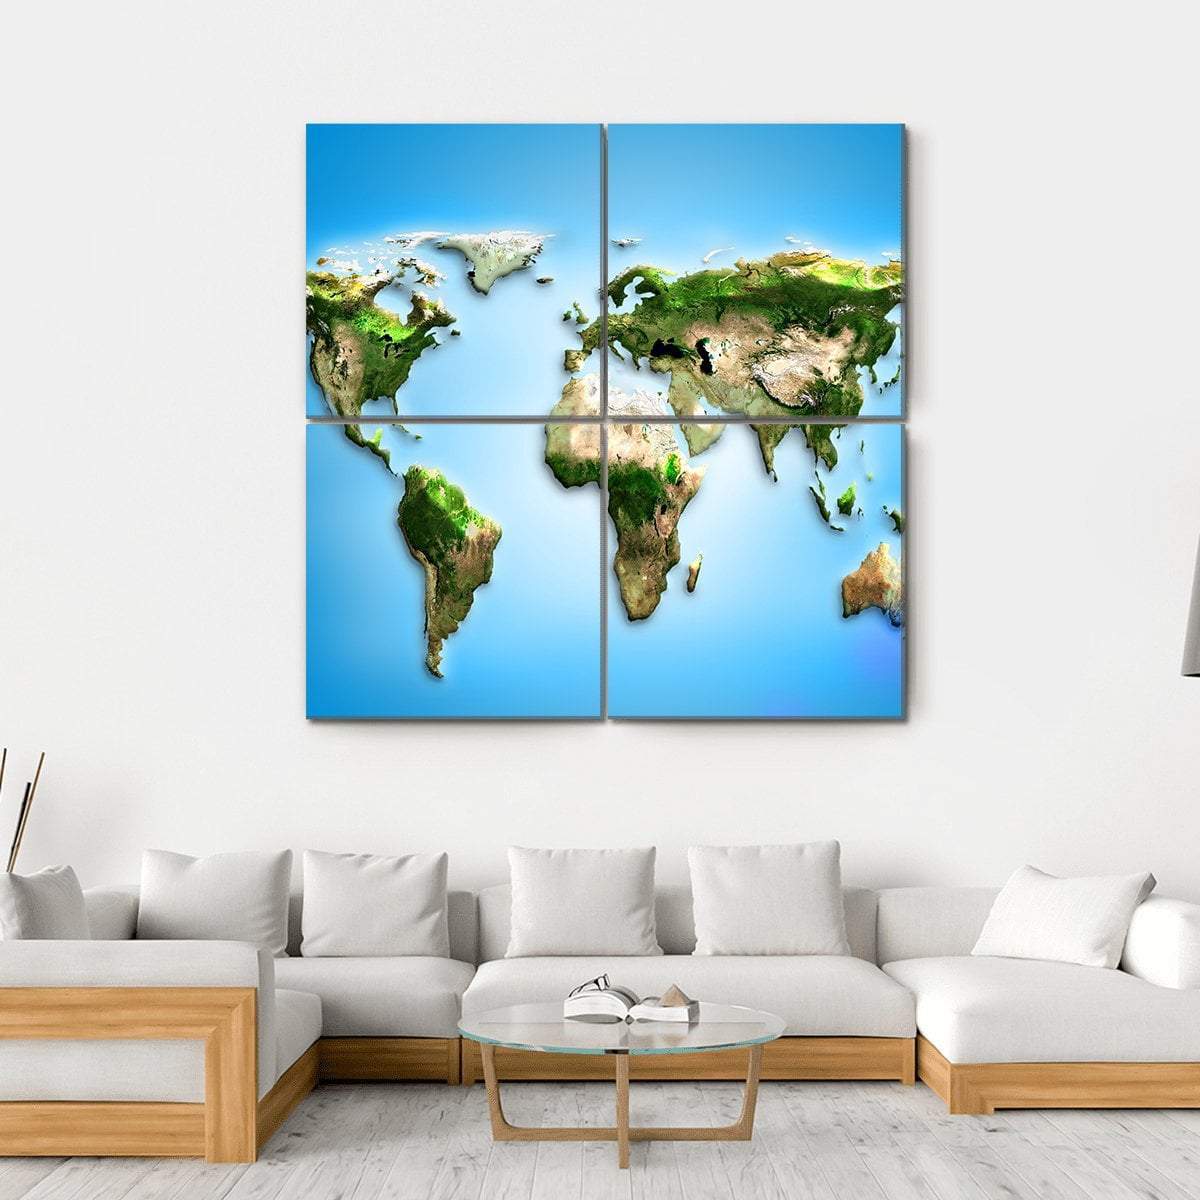 world map painting 4 Square Multi Panel Canvas